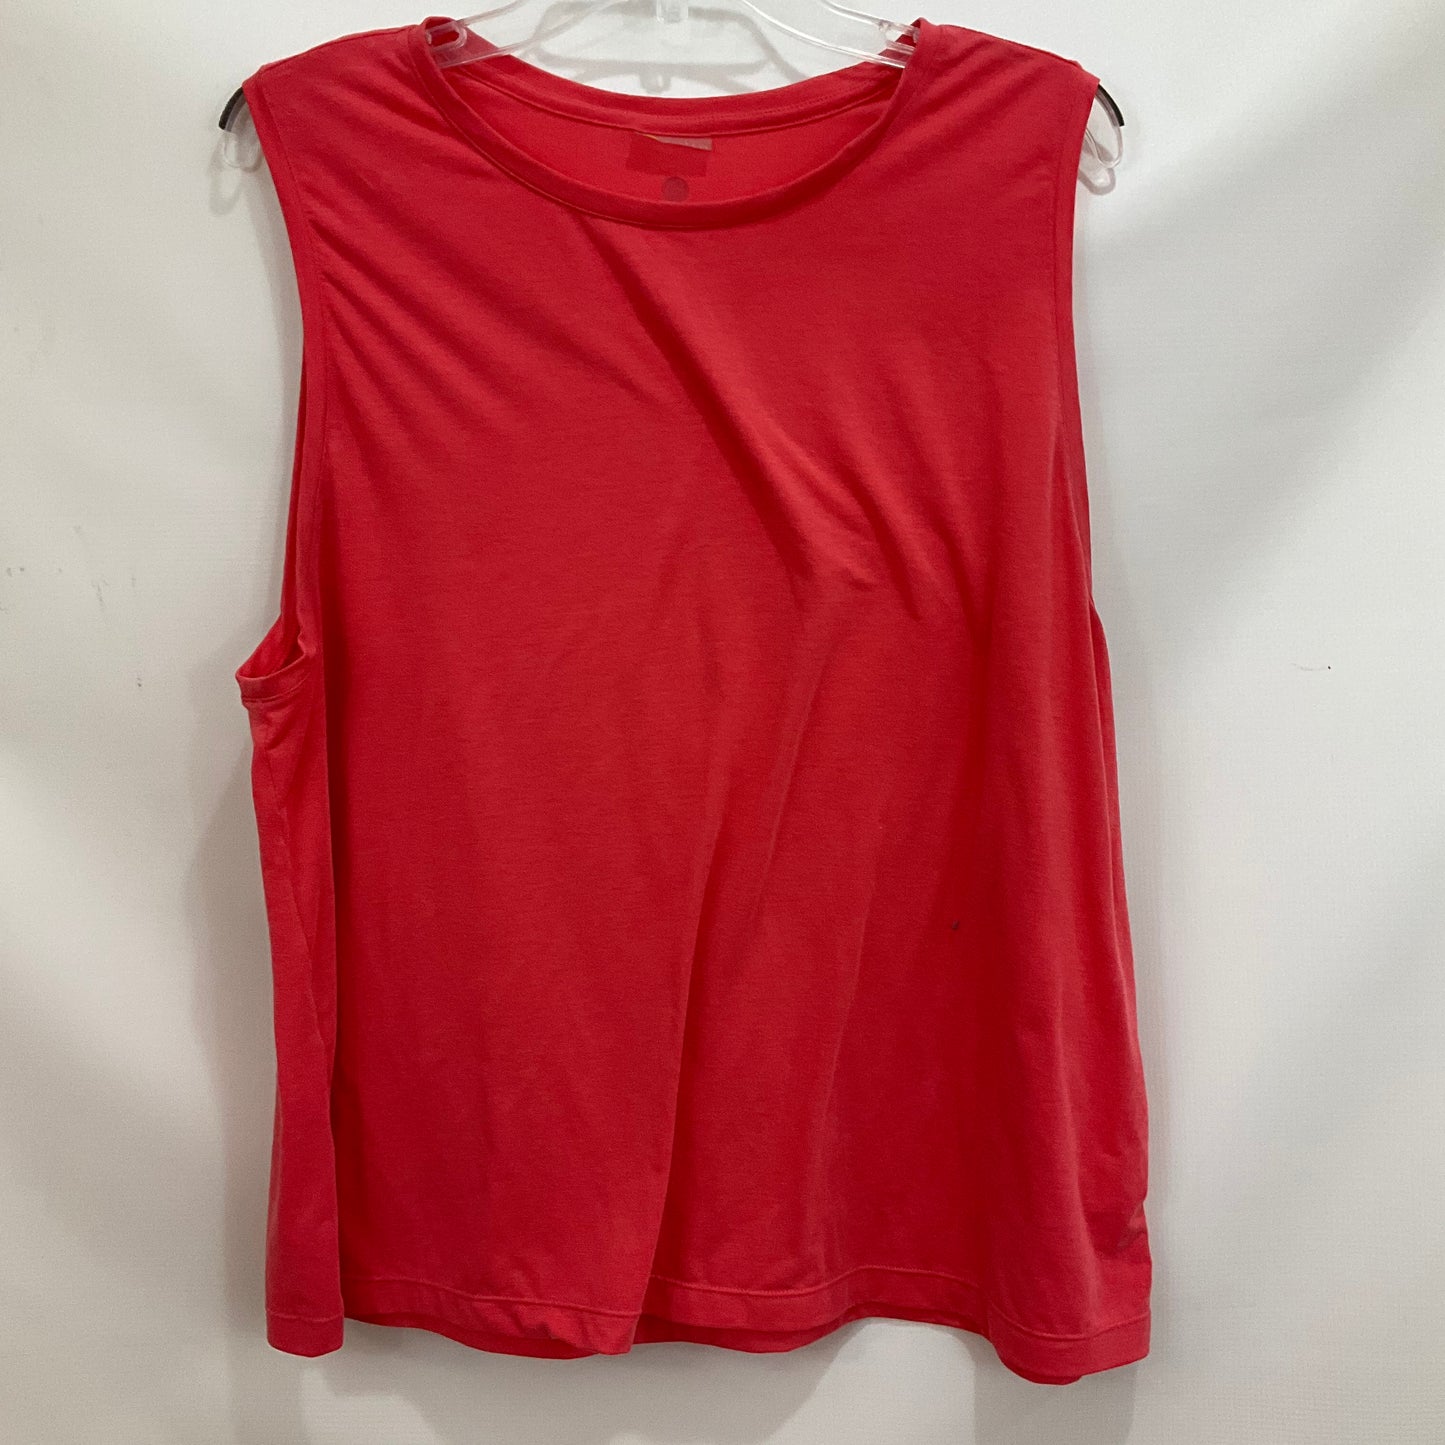 Athletic Tank Top By Zella  Size: Xl